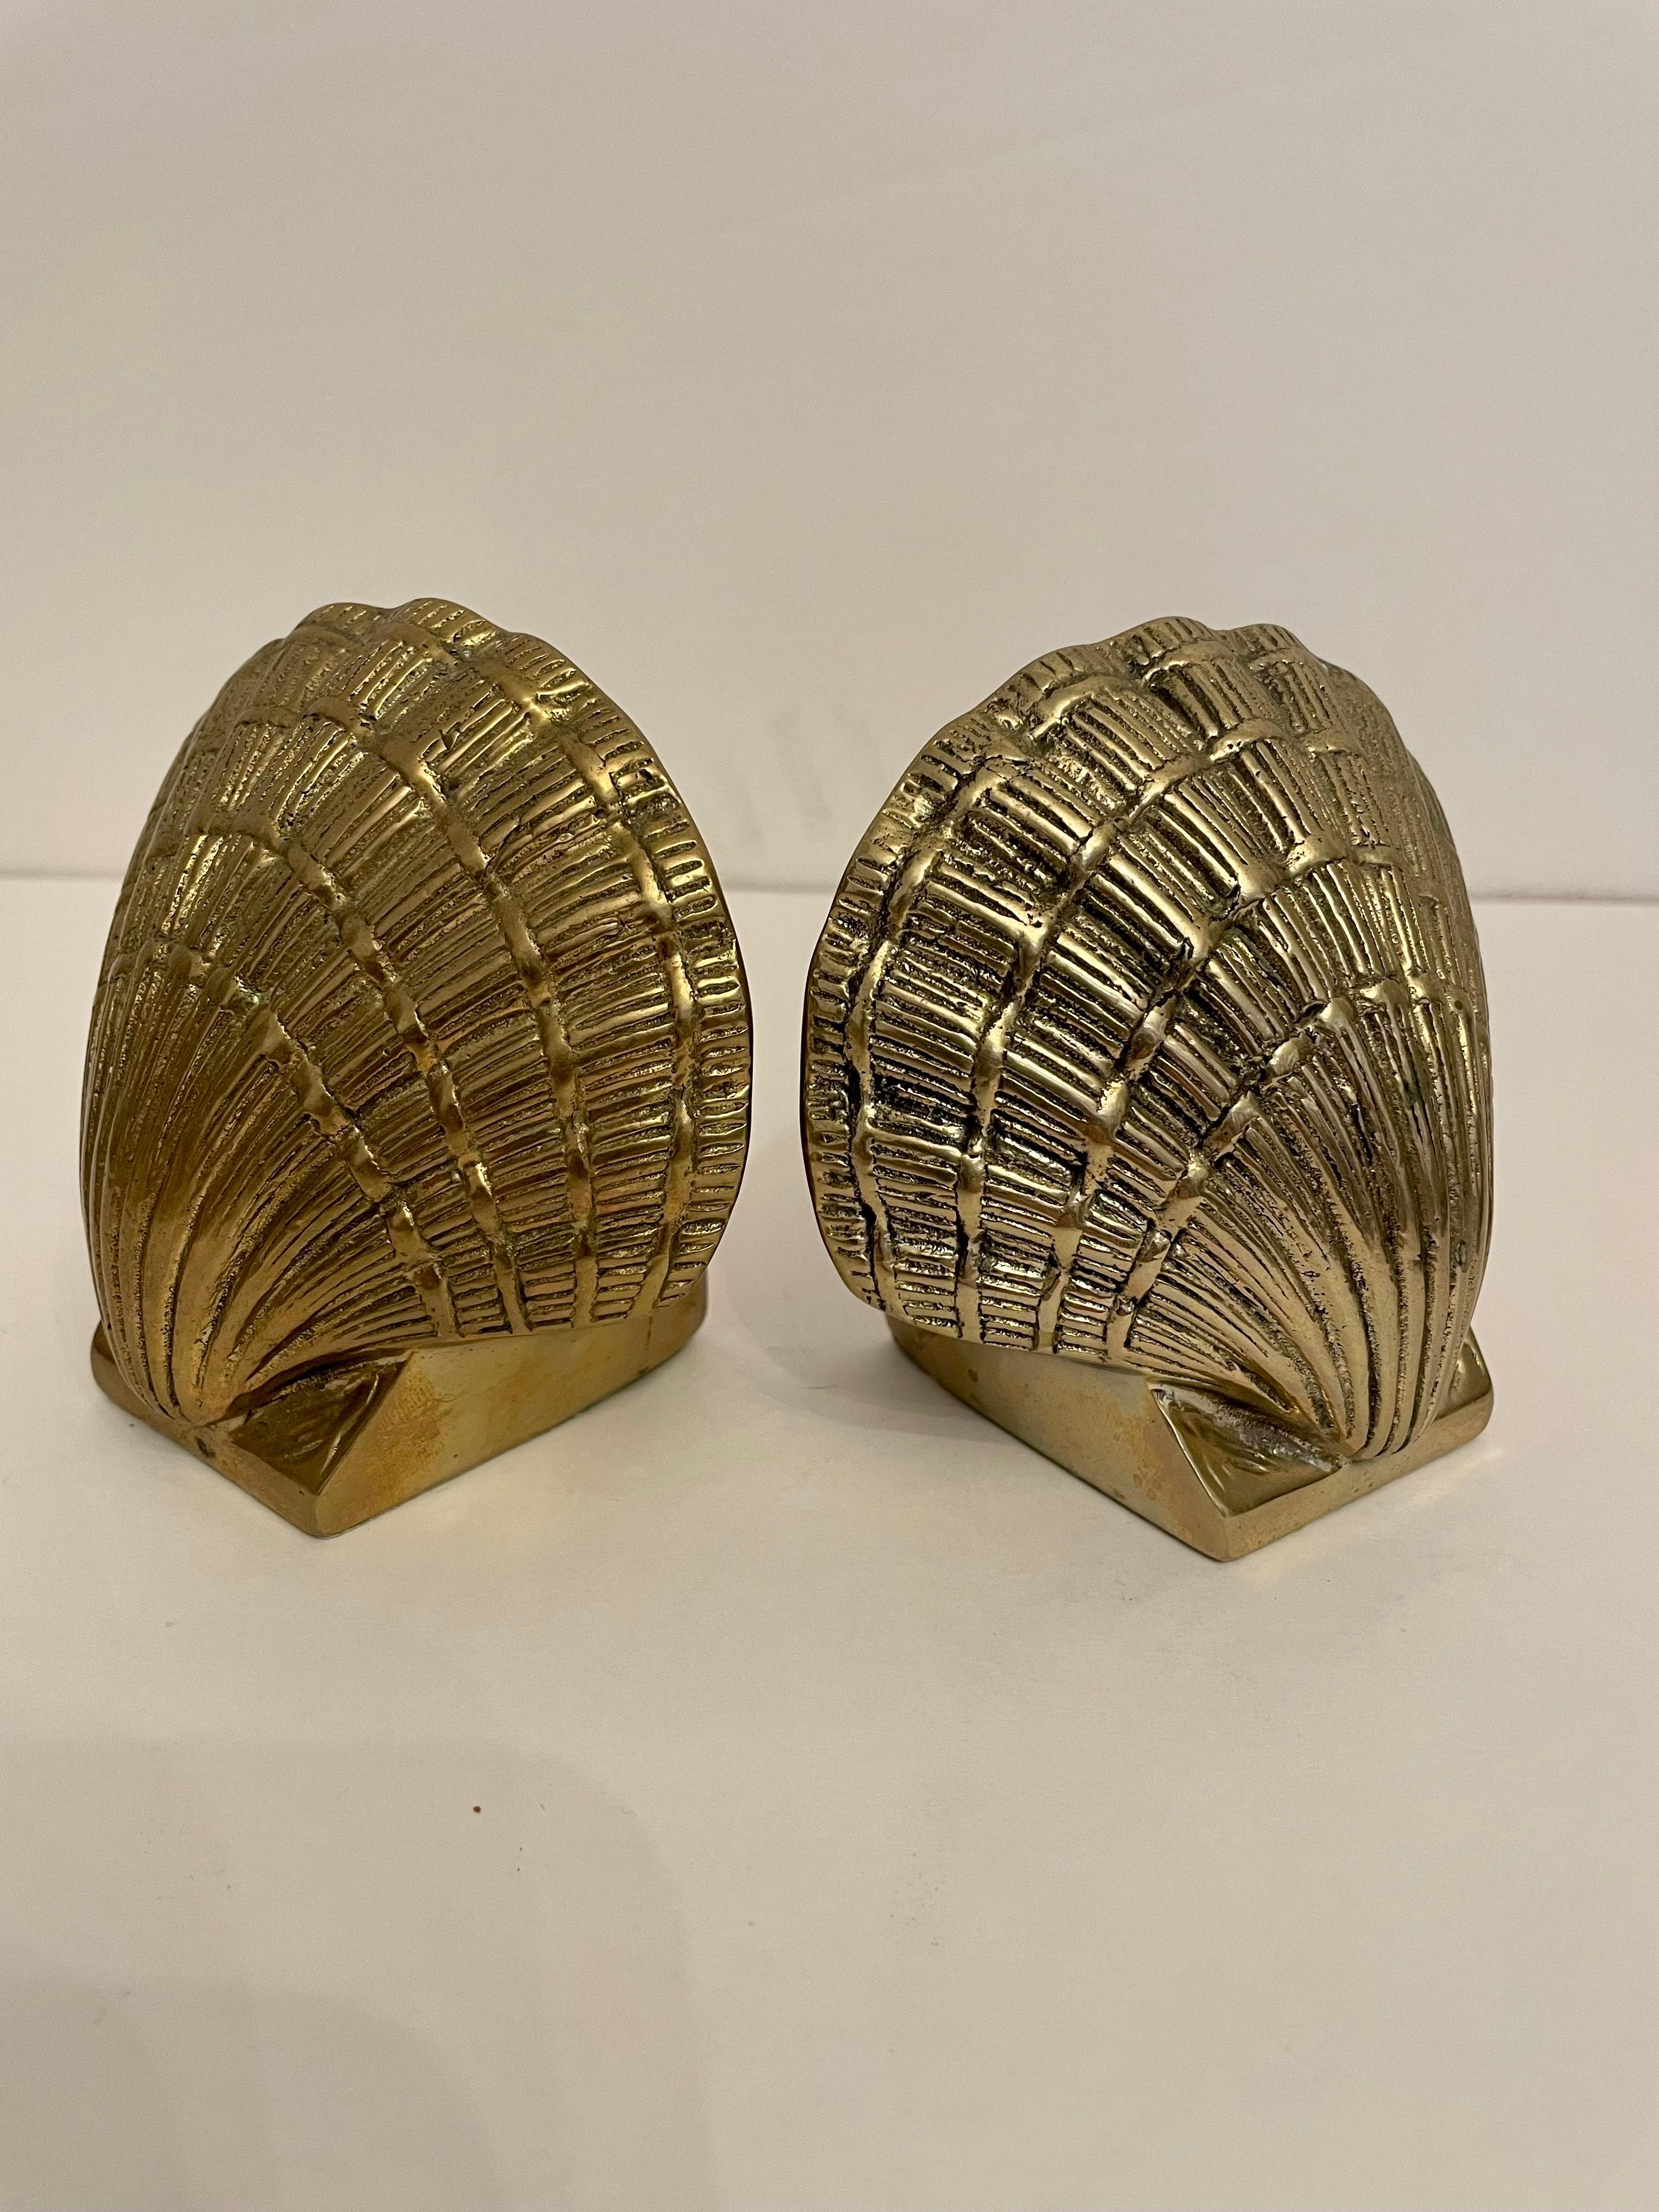 American Pair Brass Clam Shell Seashell Bookends